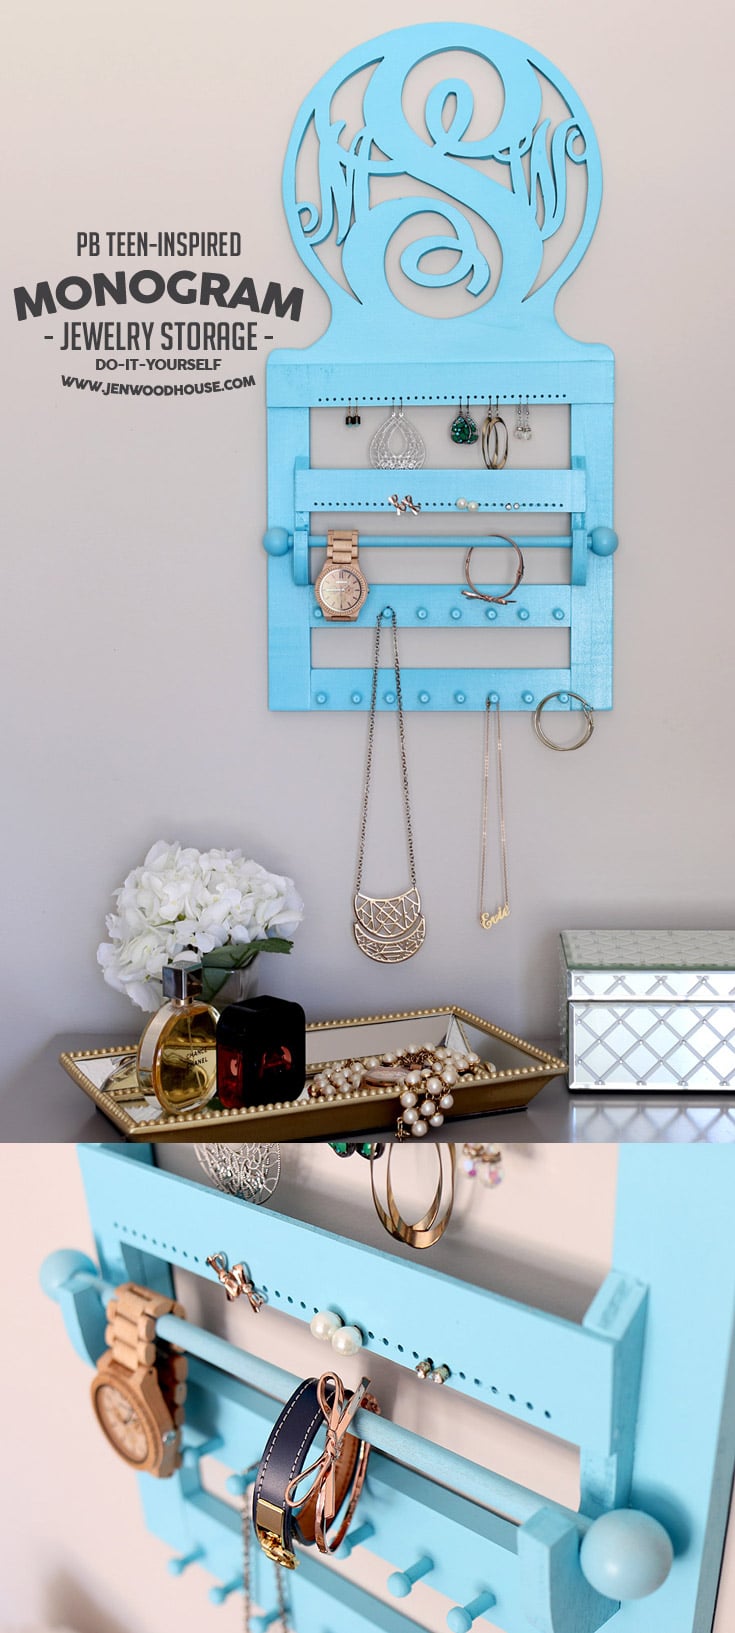 How to build a DIY Pottery Barn Teen-inspired Monogram Jewelry Storage